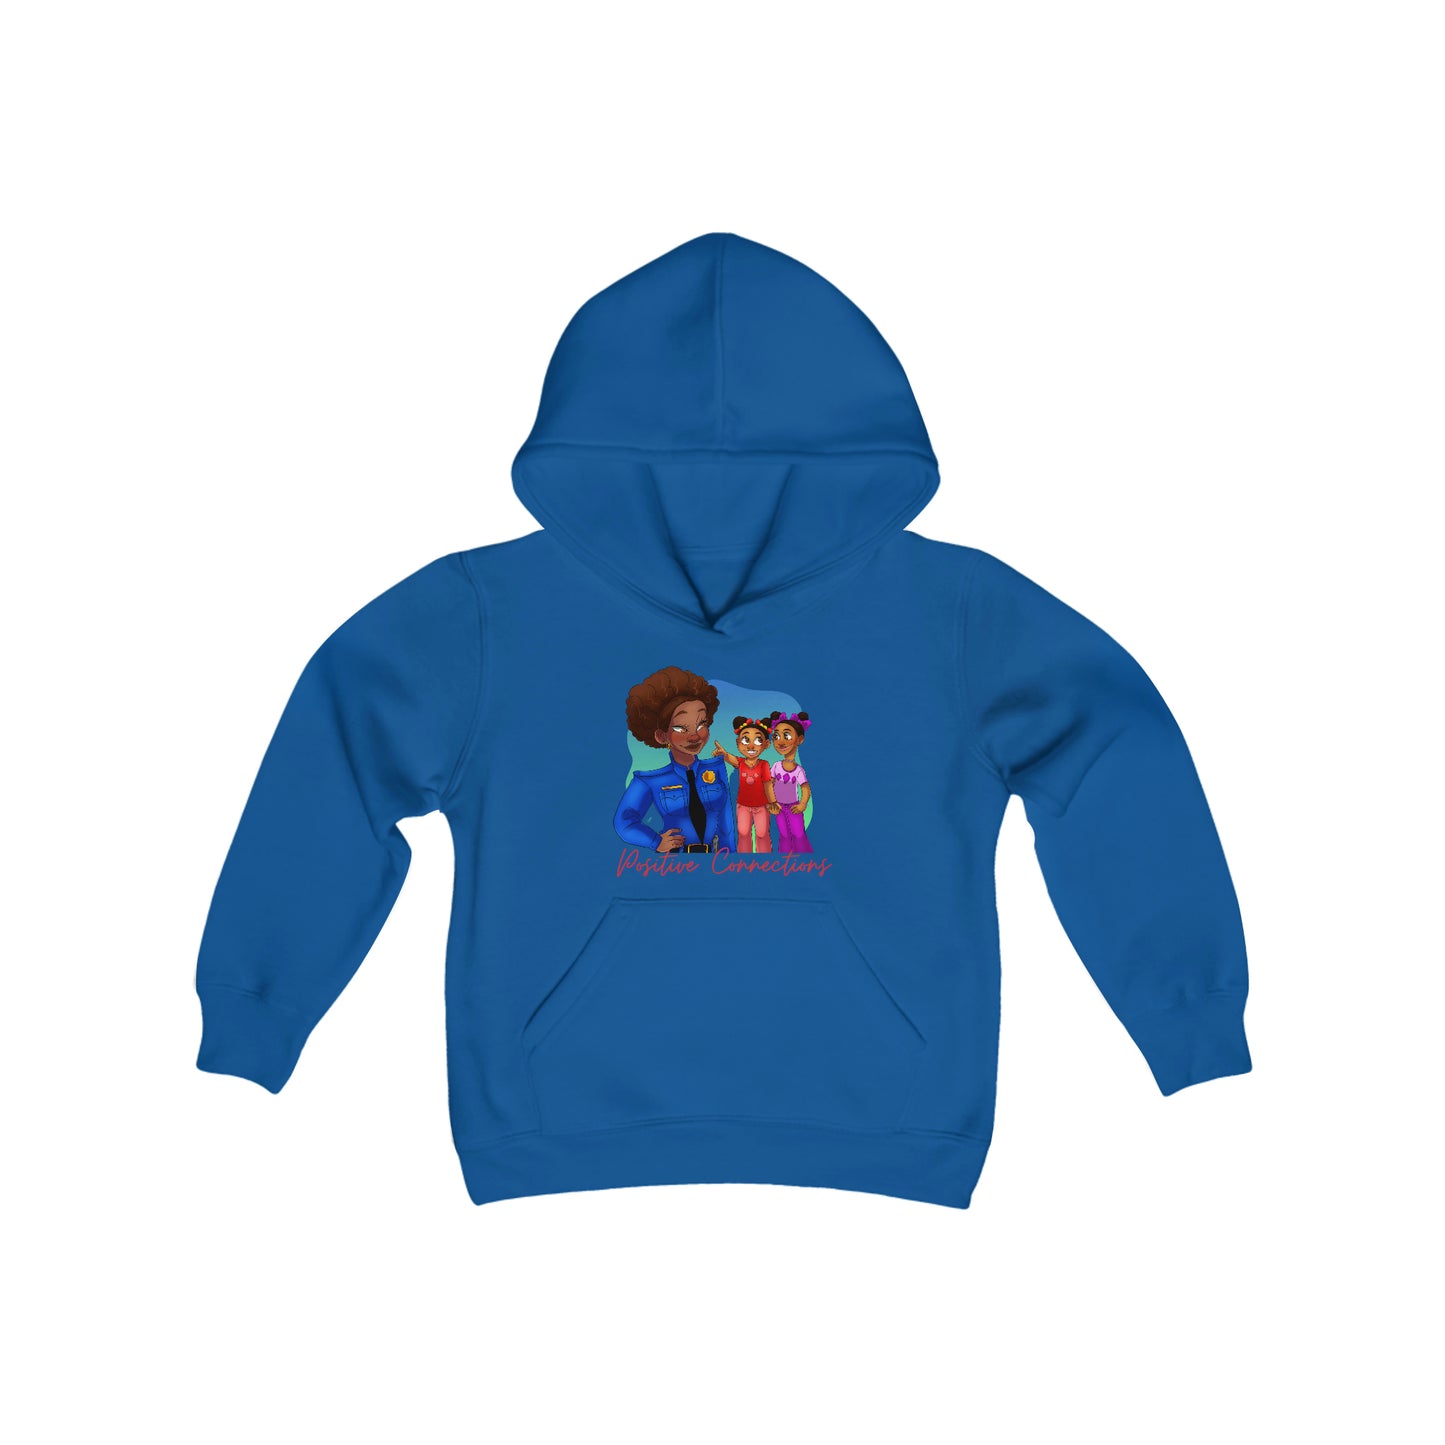 Twins in the City: Youth Heavy Blend Hooded Sweatshirt